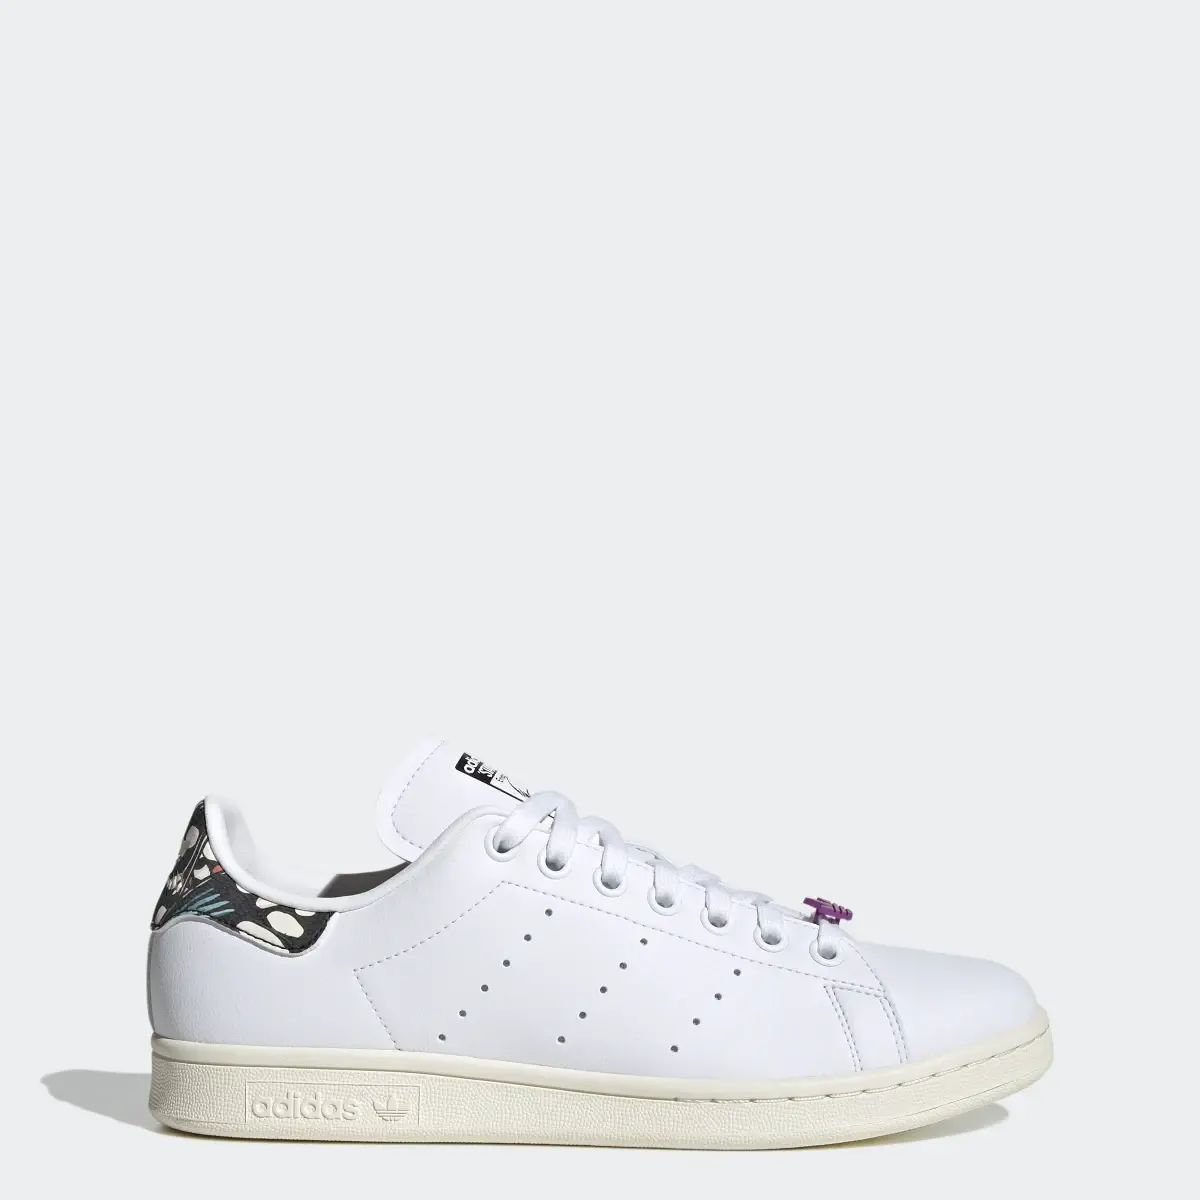 Adidas Stan Smith Shoes. 1